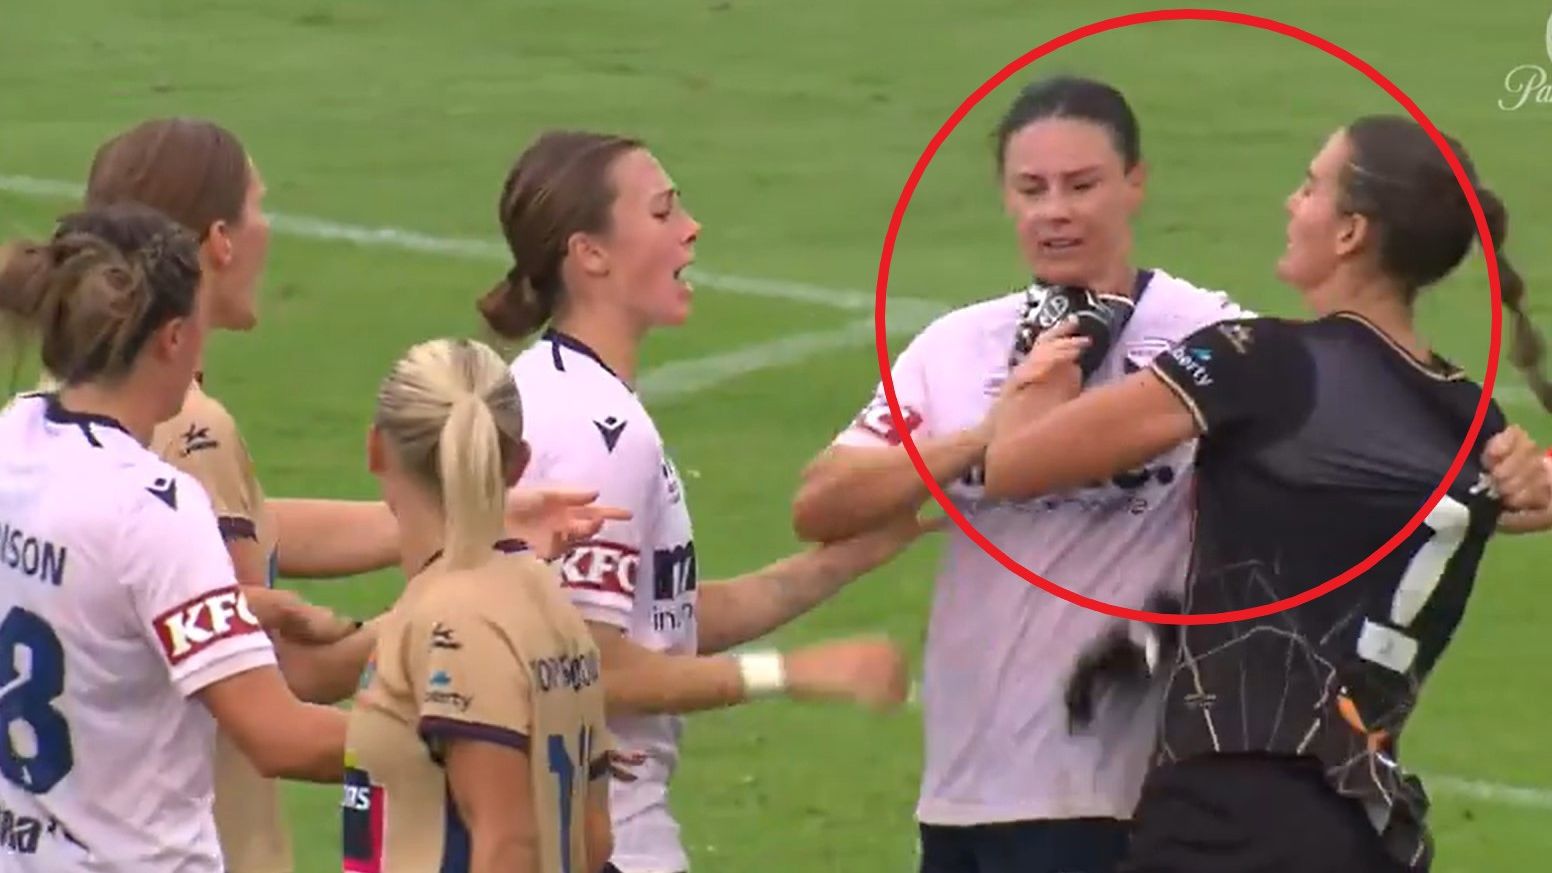 A-League Women's star banned for two games over 'assault' on rival player